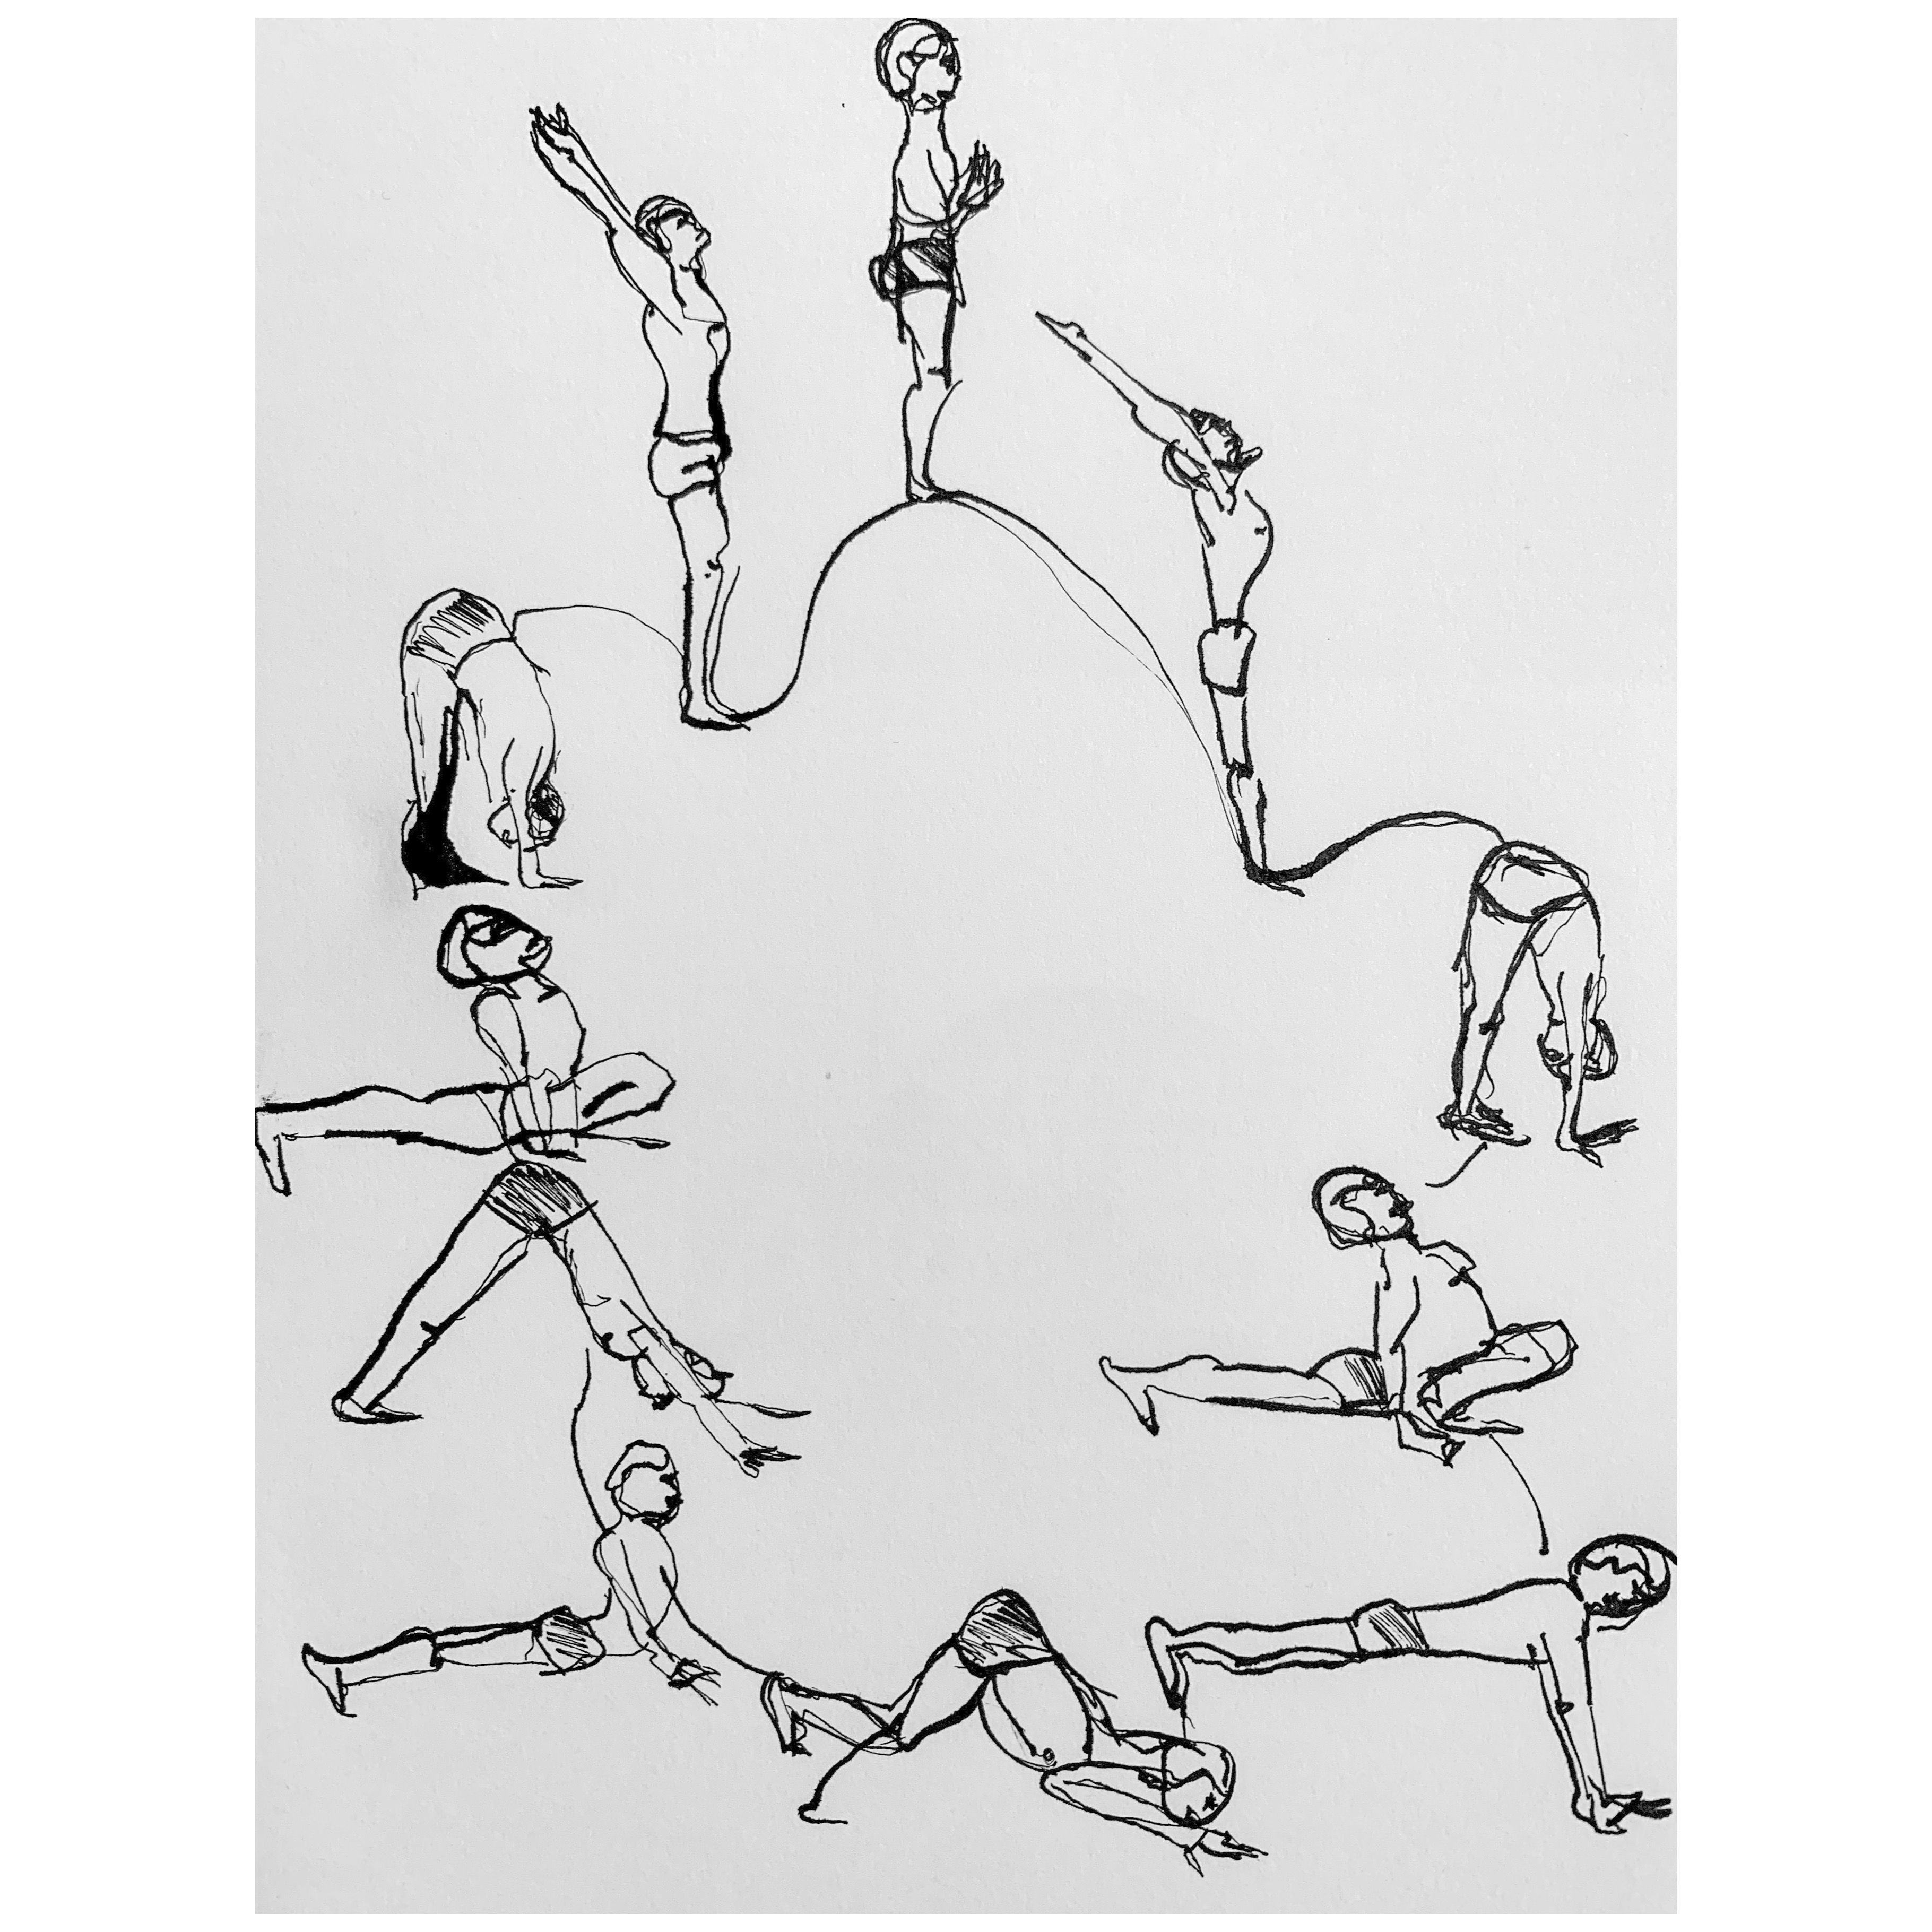 Yoga Sketch Stock Photos and Images - 123RF